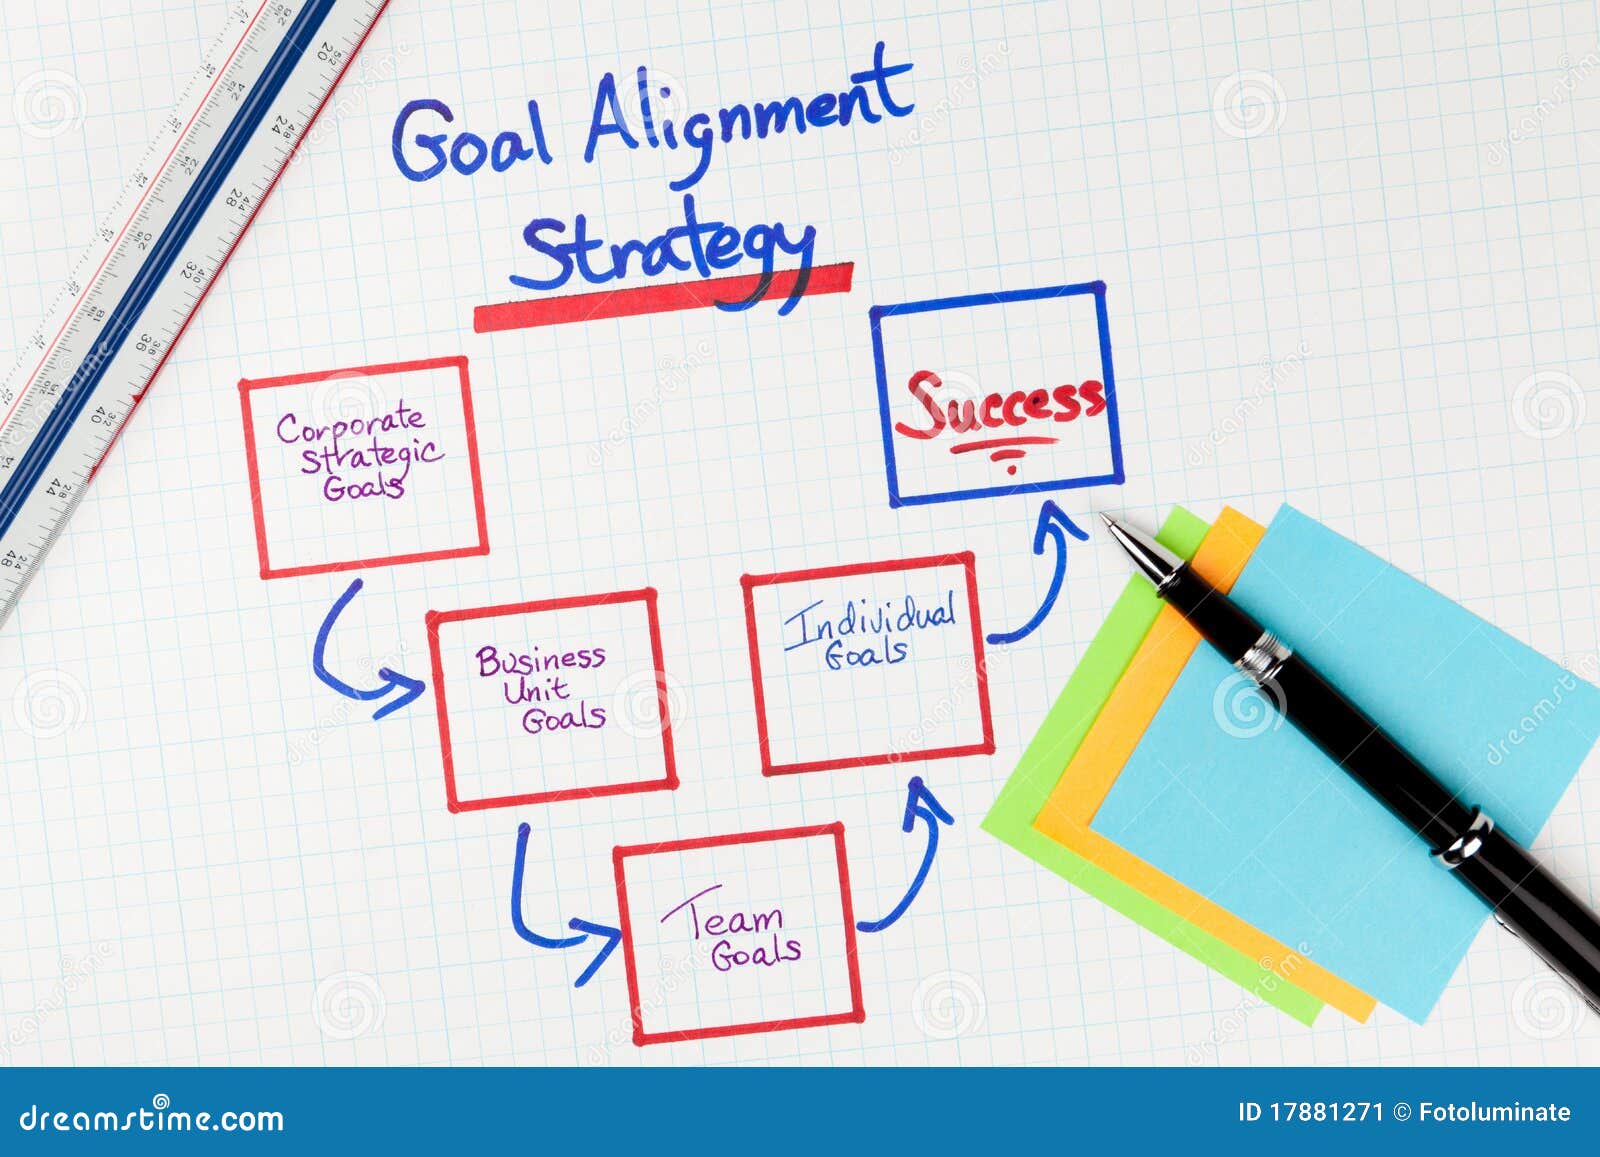 business goals alignment strategy diagram